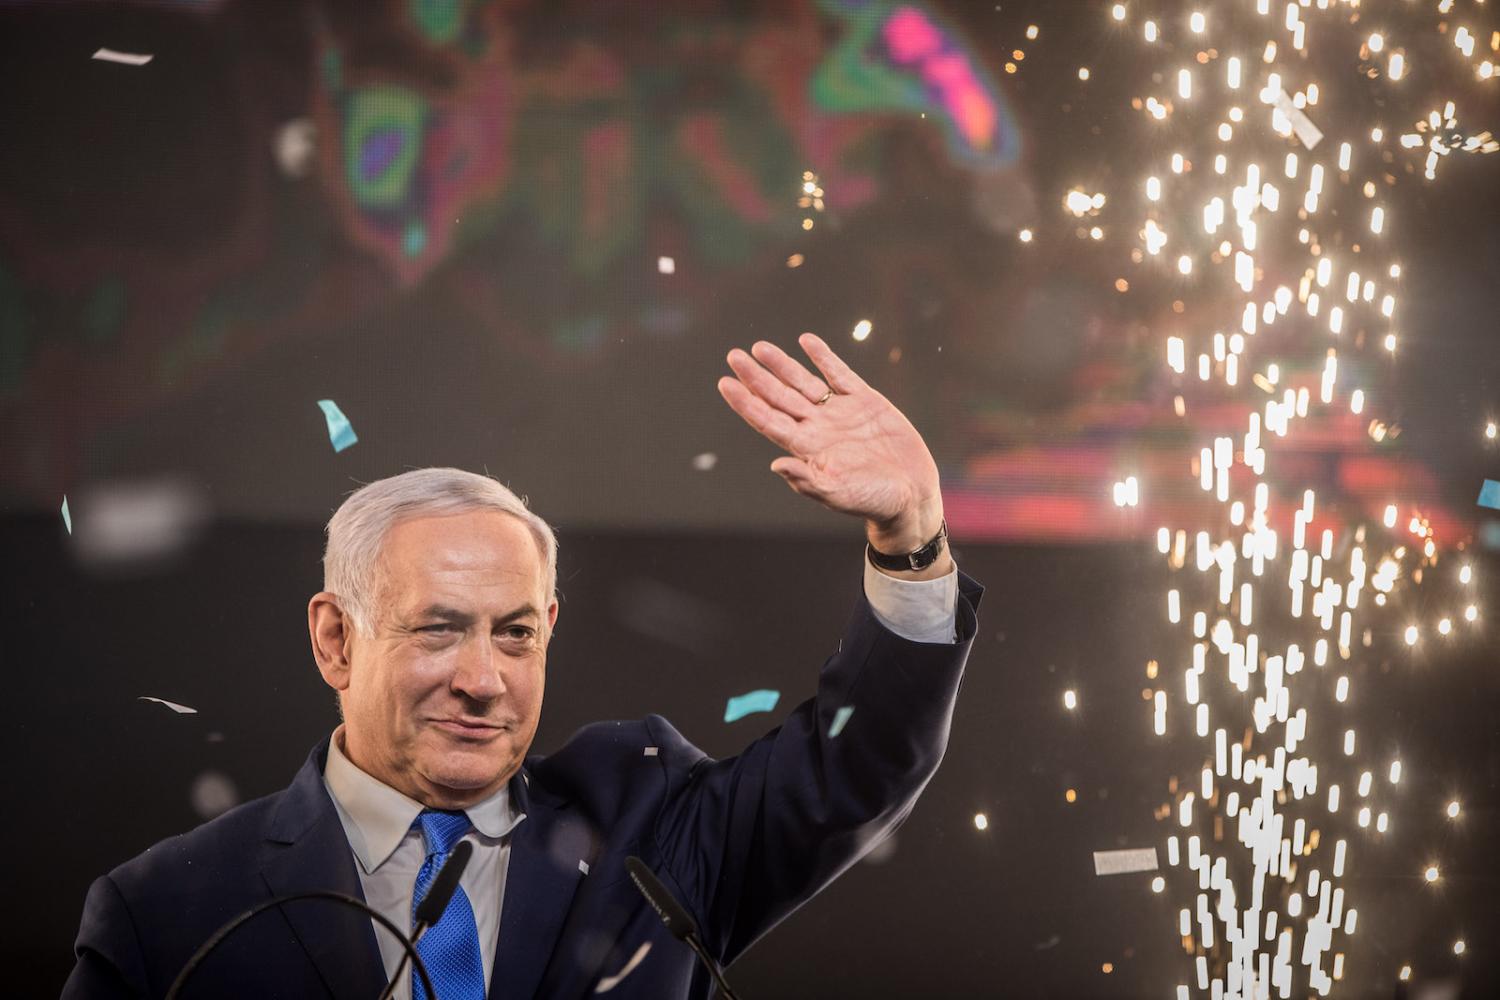 In his decade in power Benjamin Netanyahu has watched new political messiahs rise to challenge him (Photo: Oliver Weiken via Getty)